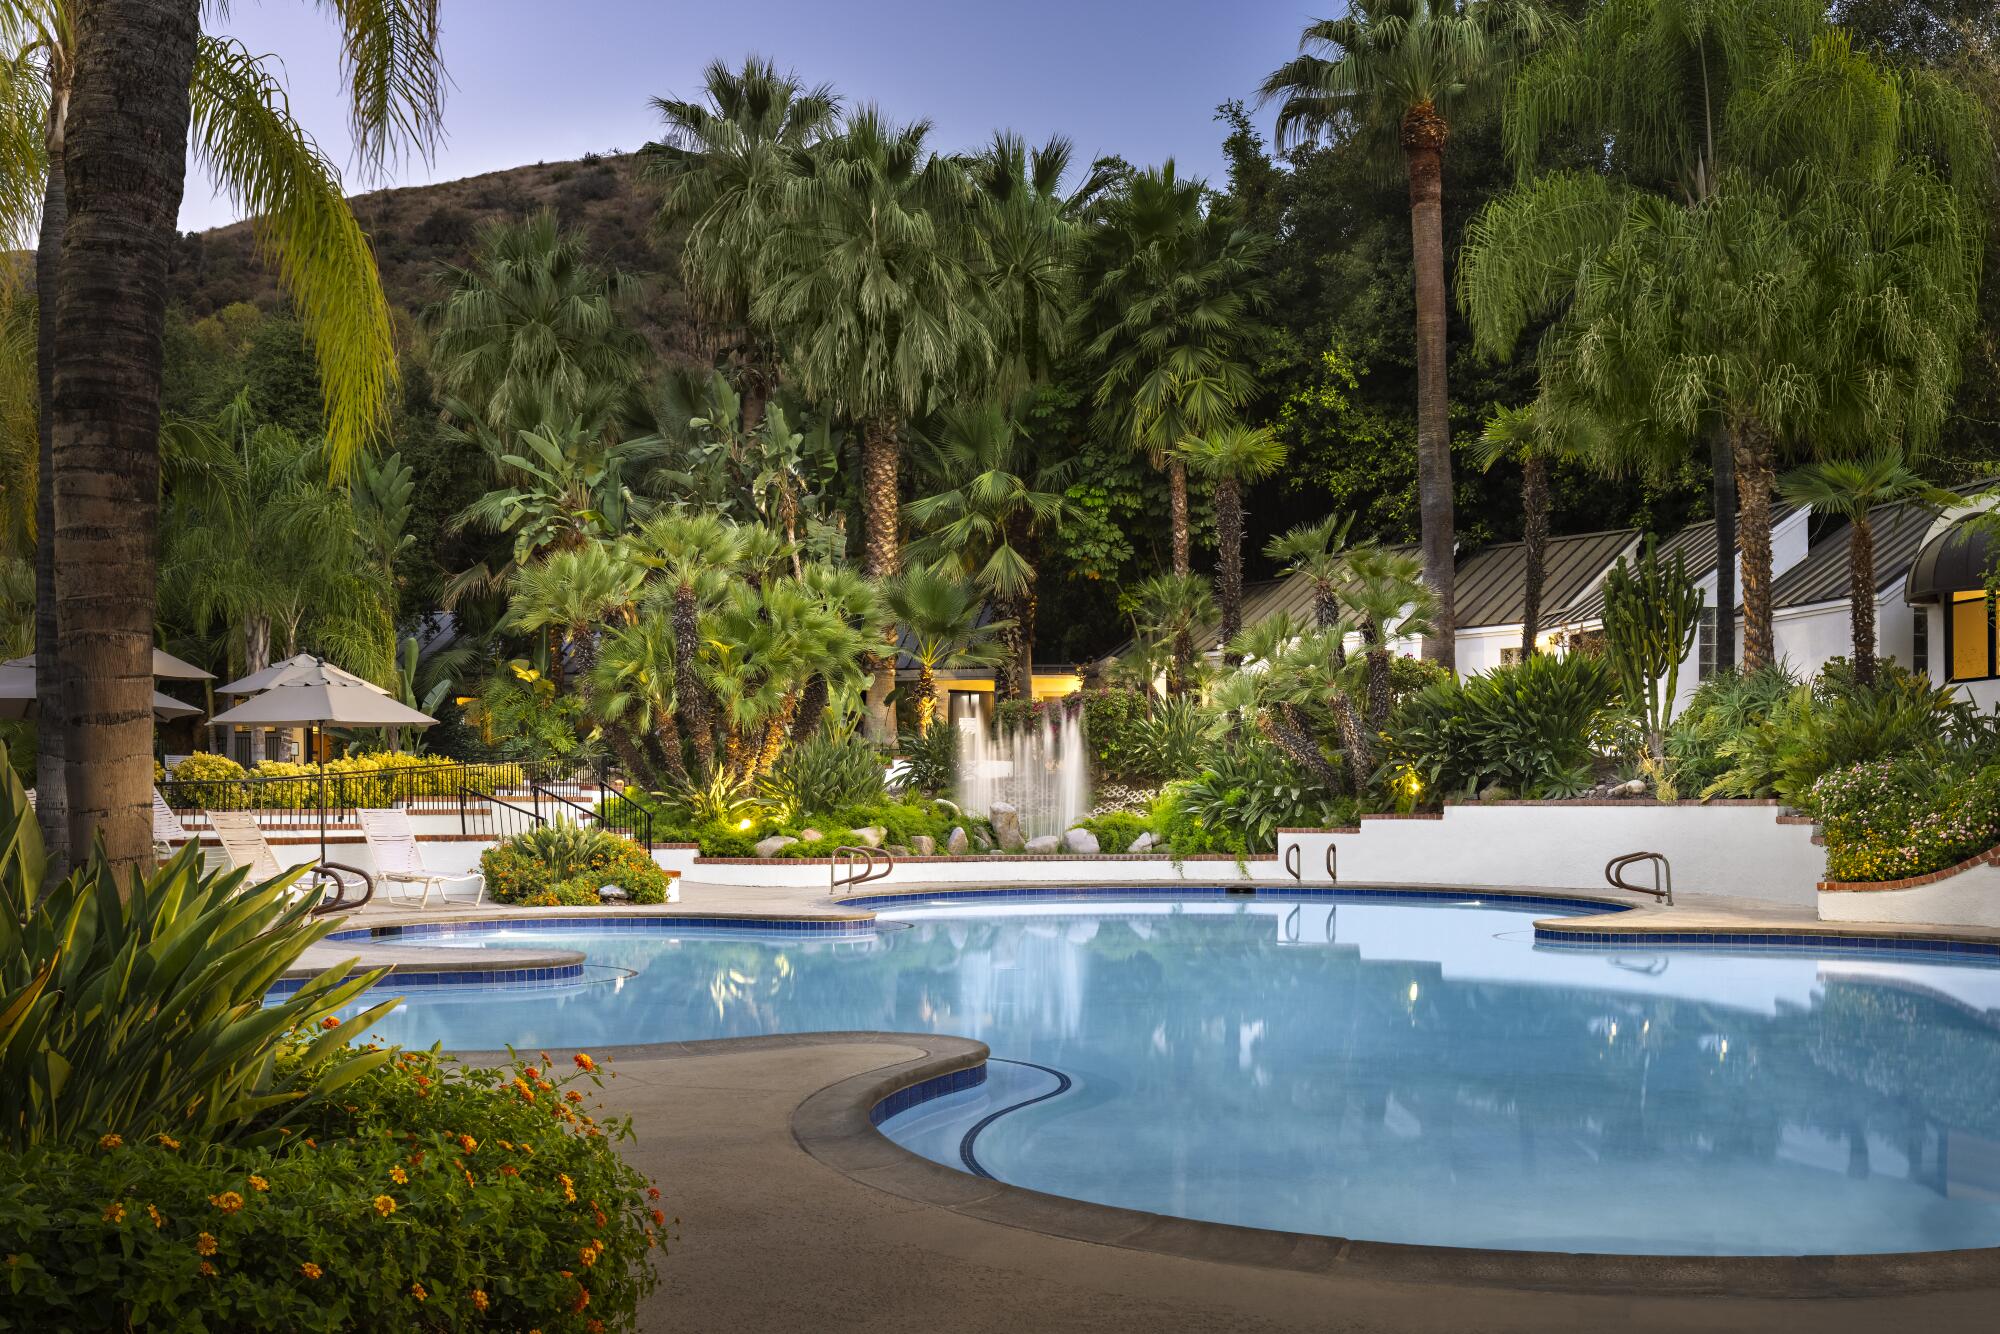 A pool at Glen Ivy surrounded by palm trees.